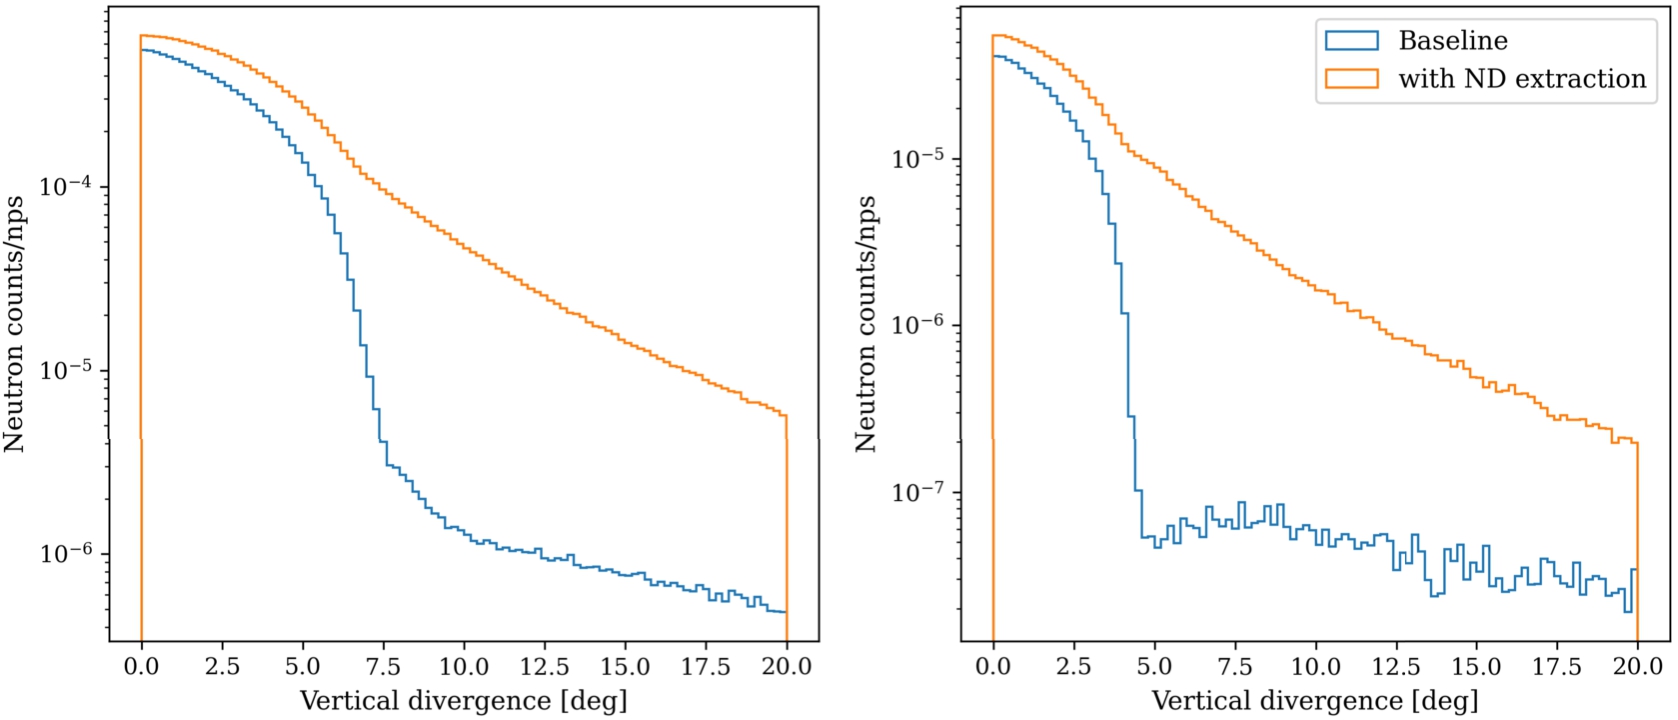 Divergence of cold neutrons at the beam port (λ>4Å) for the baseline without (blue) and with (orange) ND guide. Left for the NNBAR opening, right for the WP7 opening. The vertical axis is neutron counts/nps.